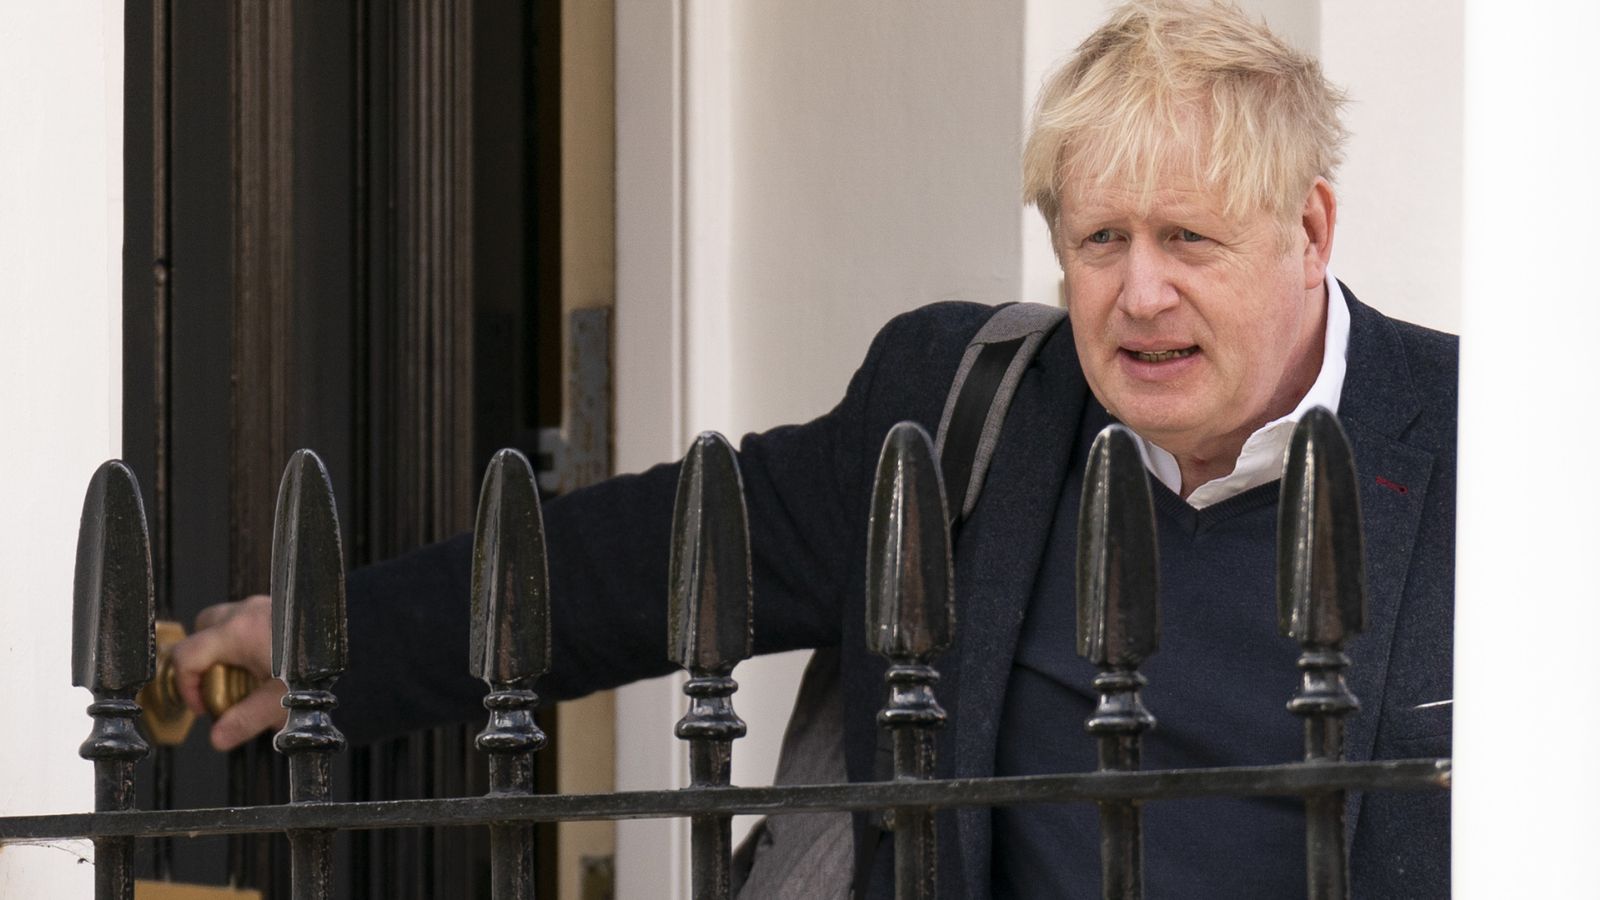 Boris Johnson has 'huge role to play' in Conservative Party - cabinet minister